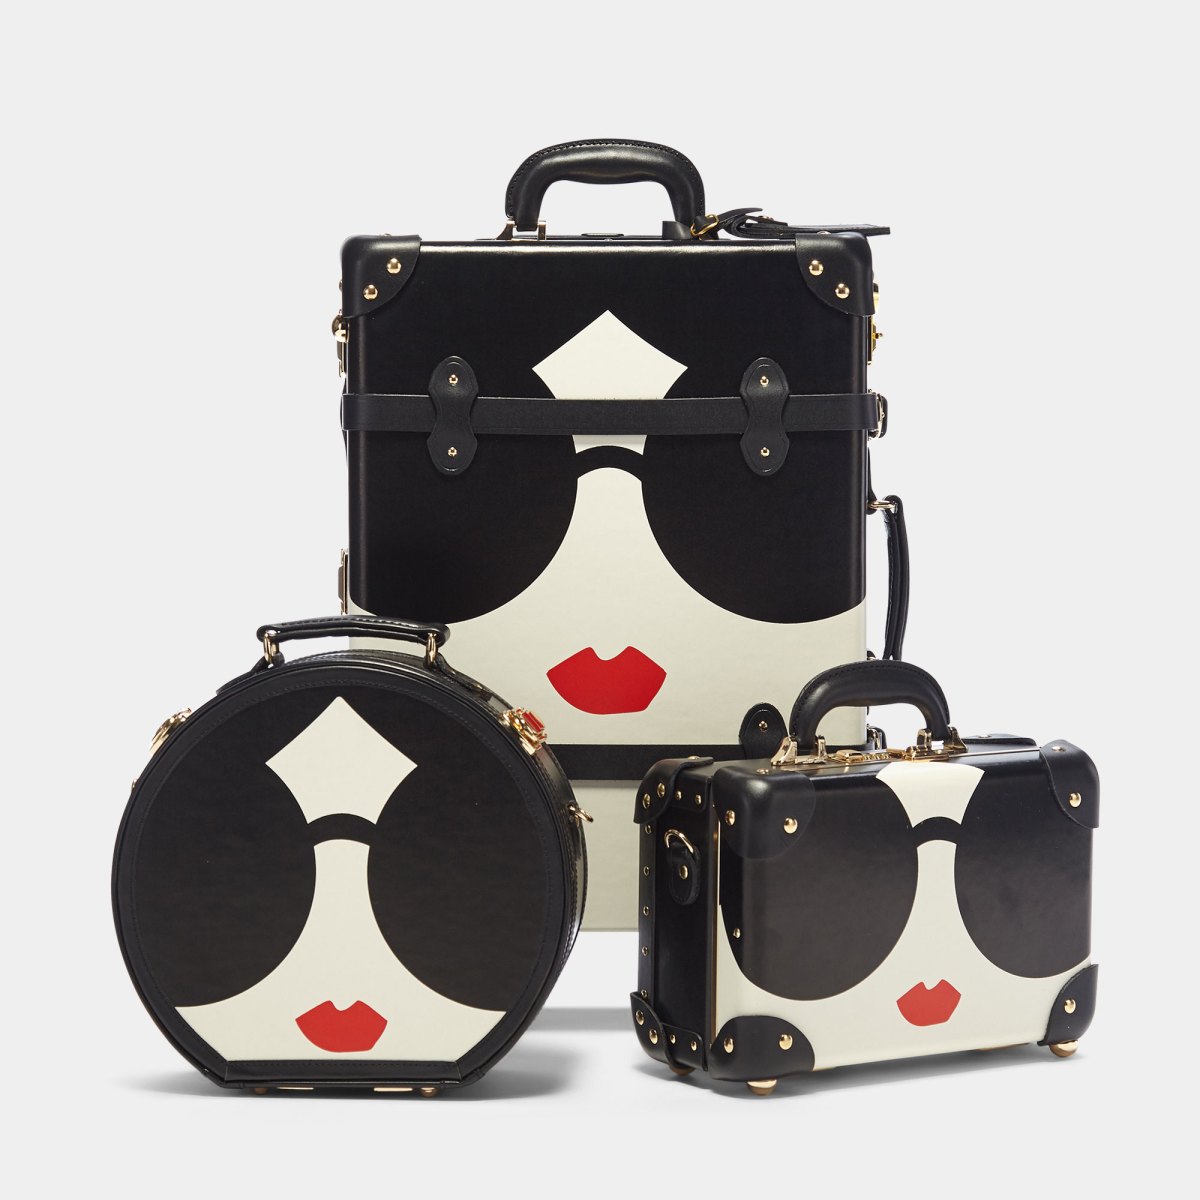 Alice + Olivia x SteamLine Luggage Suitcases, Travel Bags: Details